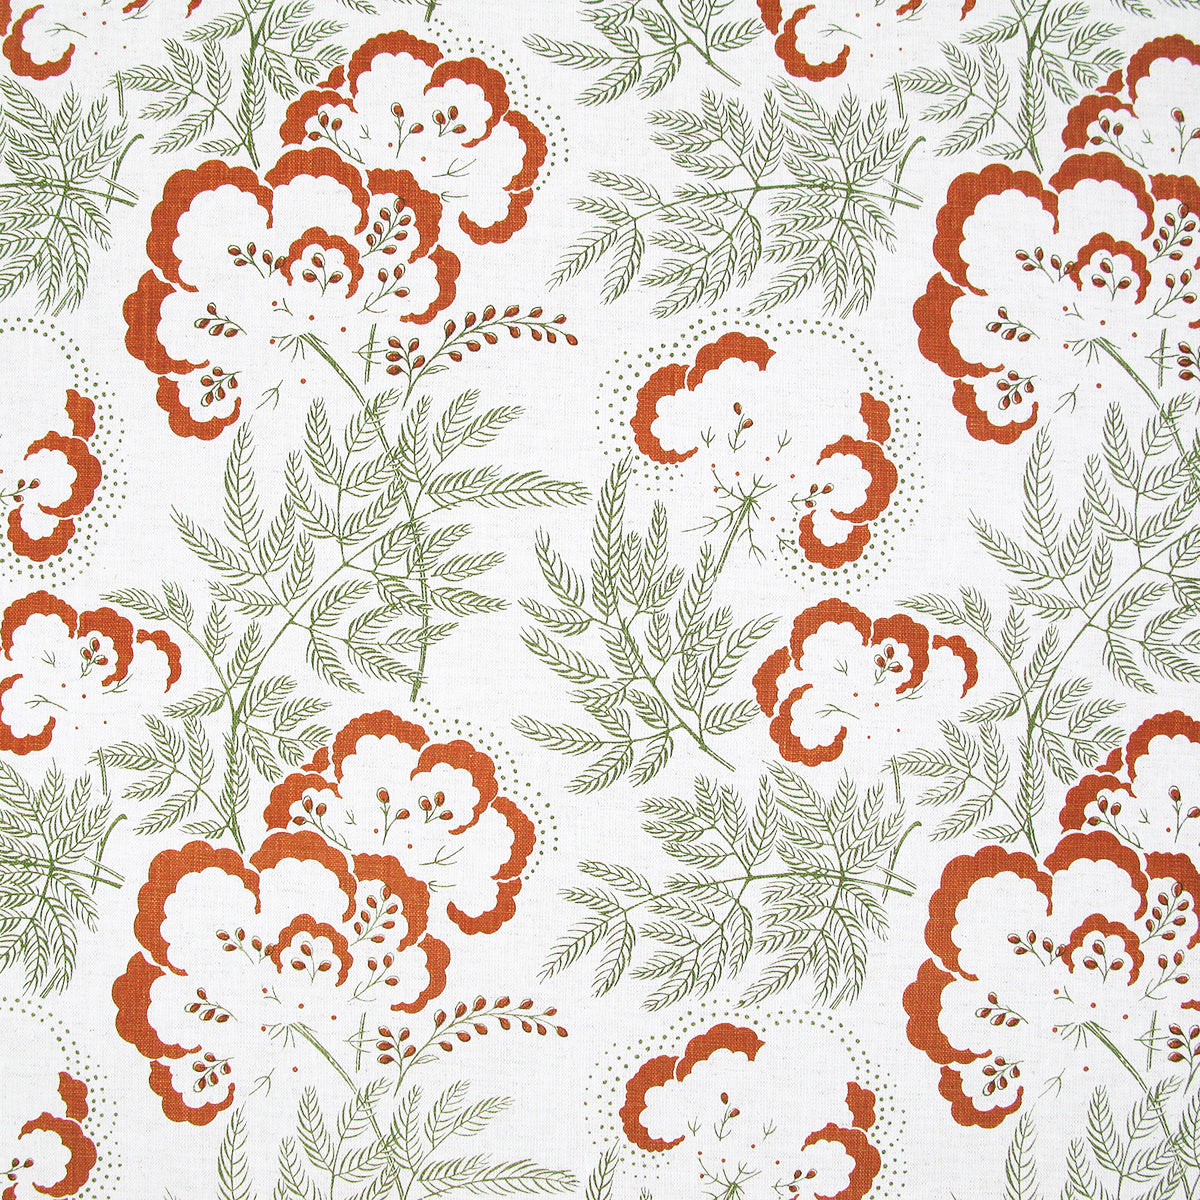 Detail of fabric in an intricate floral print in rust and green on a white field.